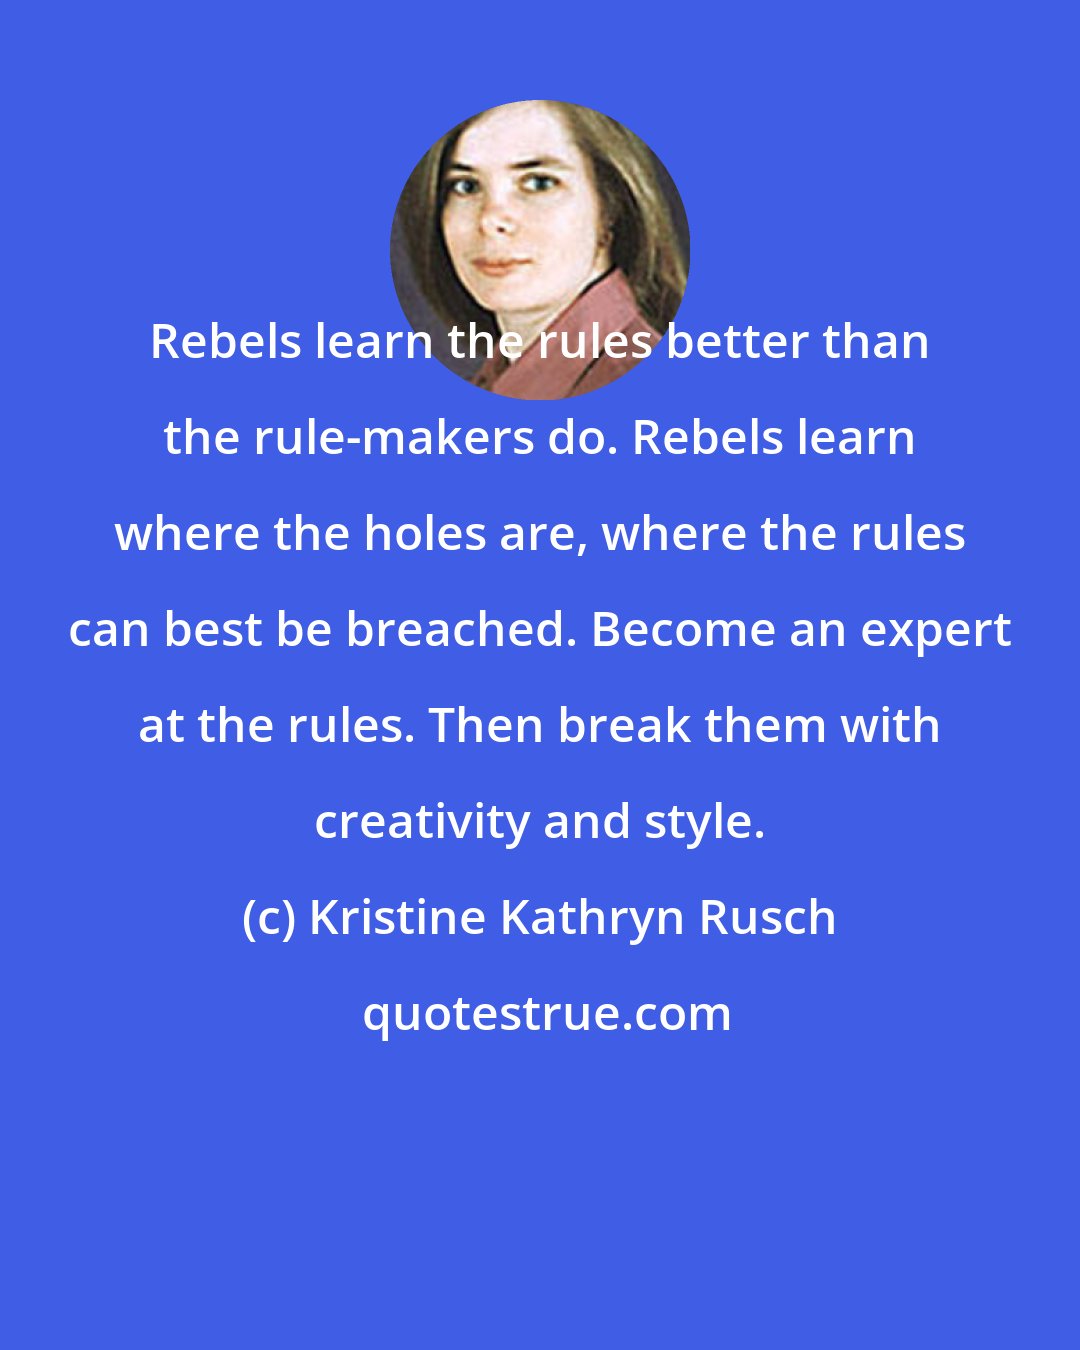 Kristine Kathryn Rusch: Rebels learn the rules better than the rule-makers do. Rebels learn where the holes are, where the rules can best be breached. Become an expert at the rules. Then break them with creativity and style.